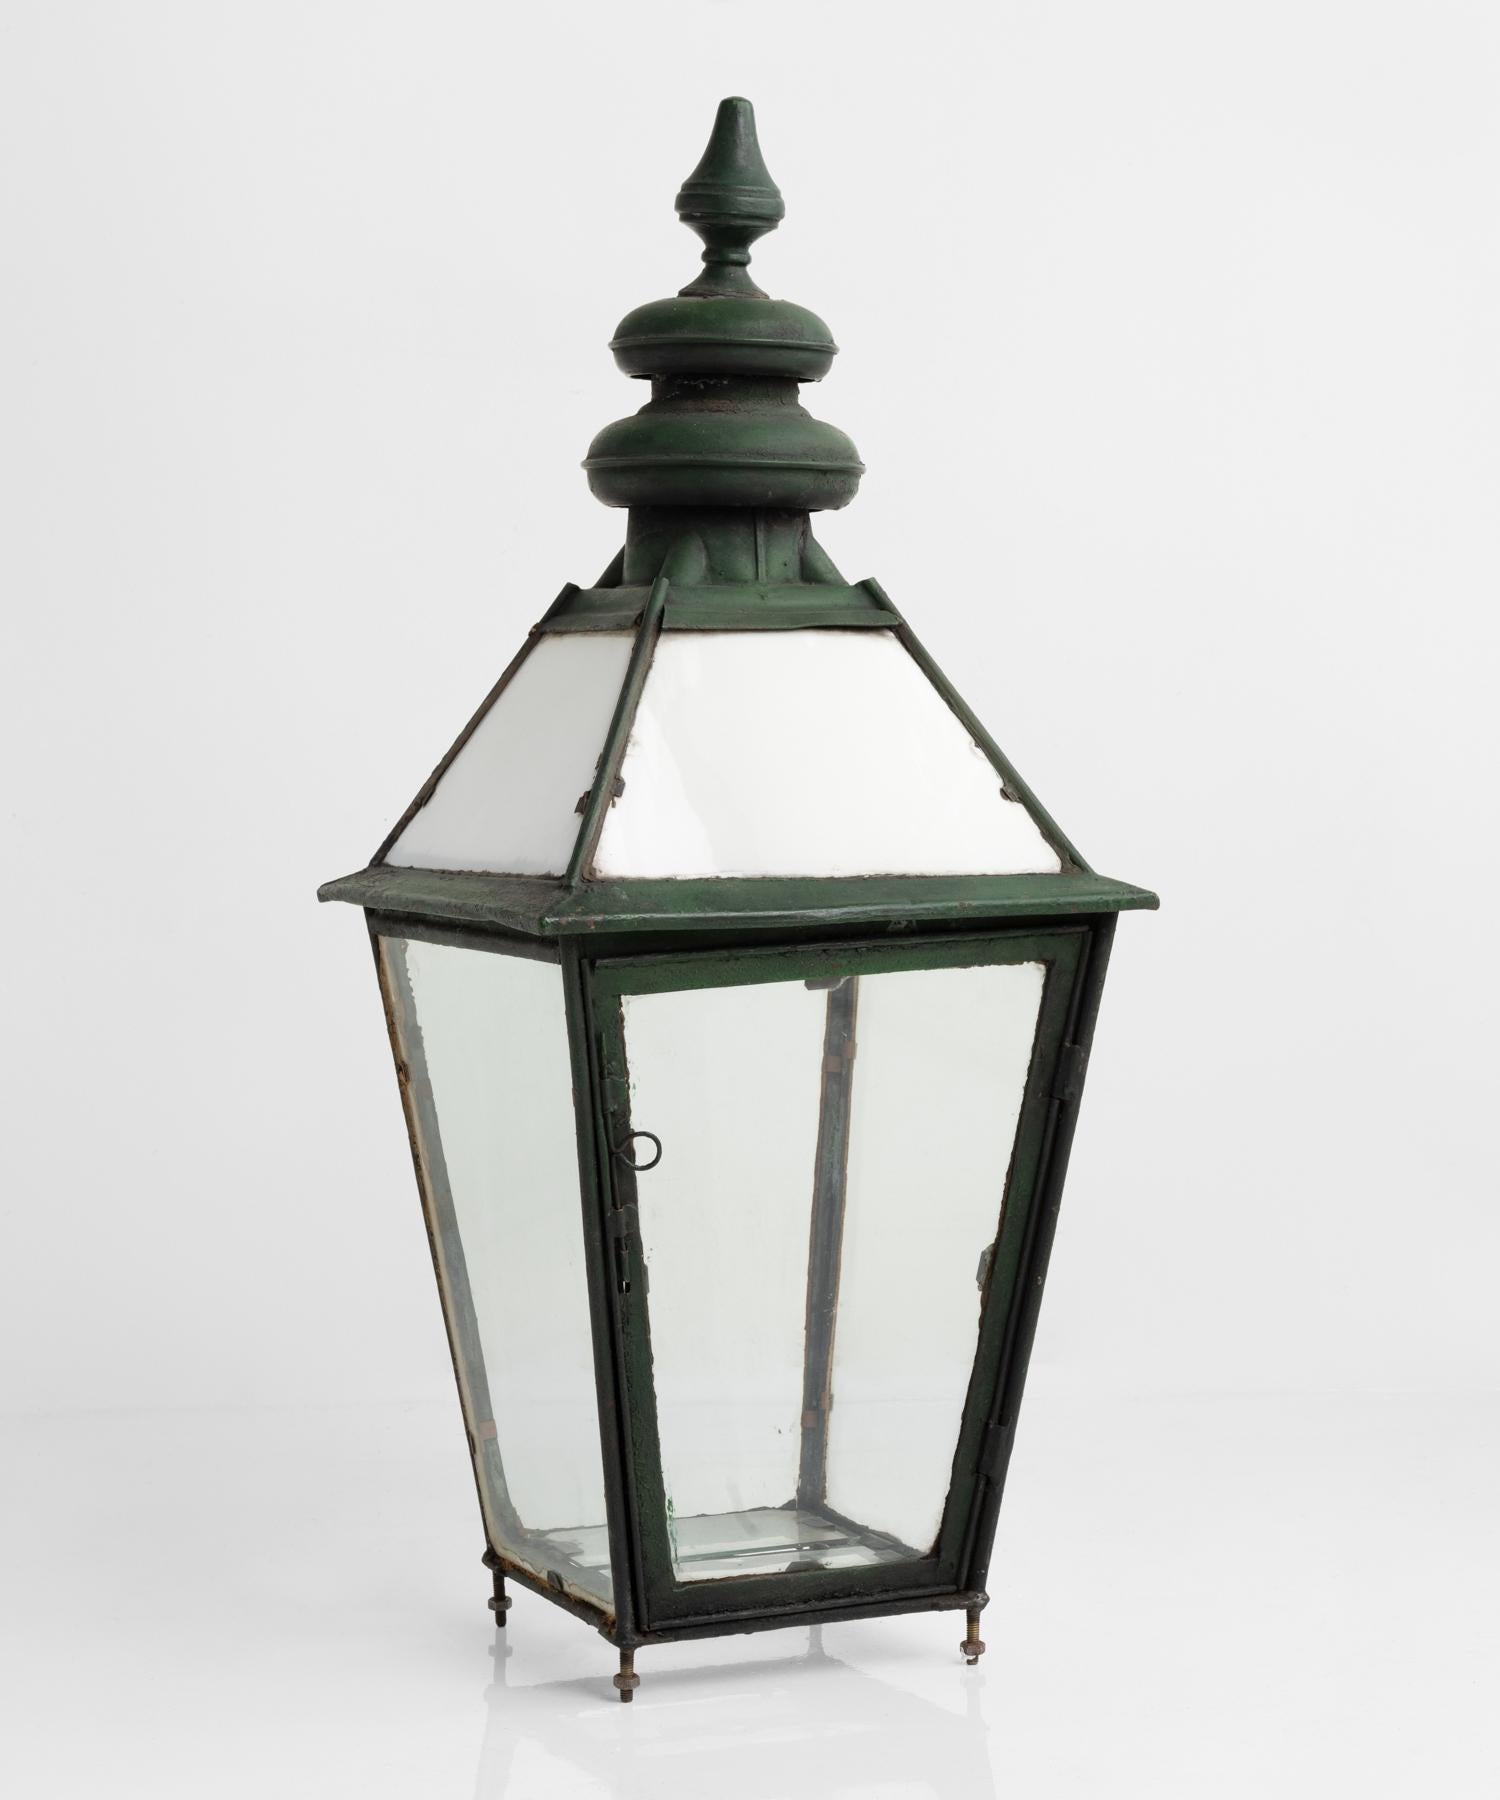 Copper and milk glass lantern, England, circa 1870.

Tall verdigris copper lantern with original milk glass panels in the top section, and clear glass beneath.